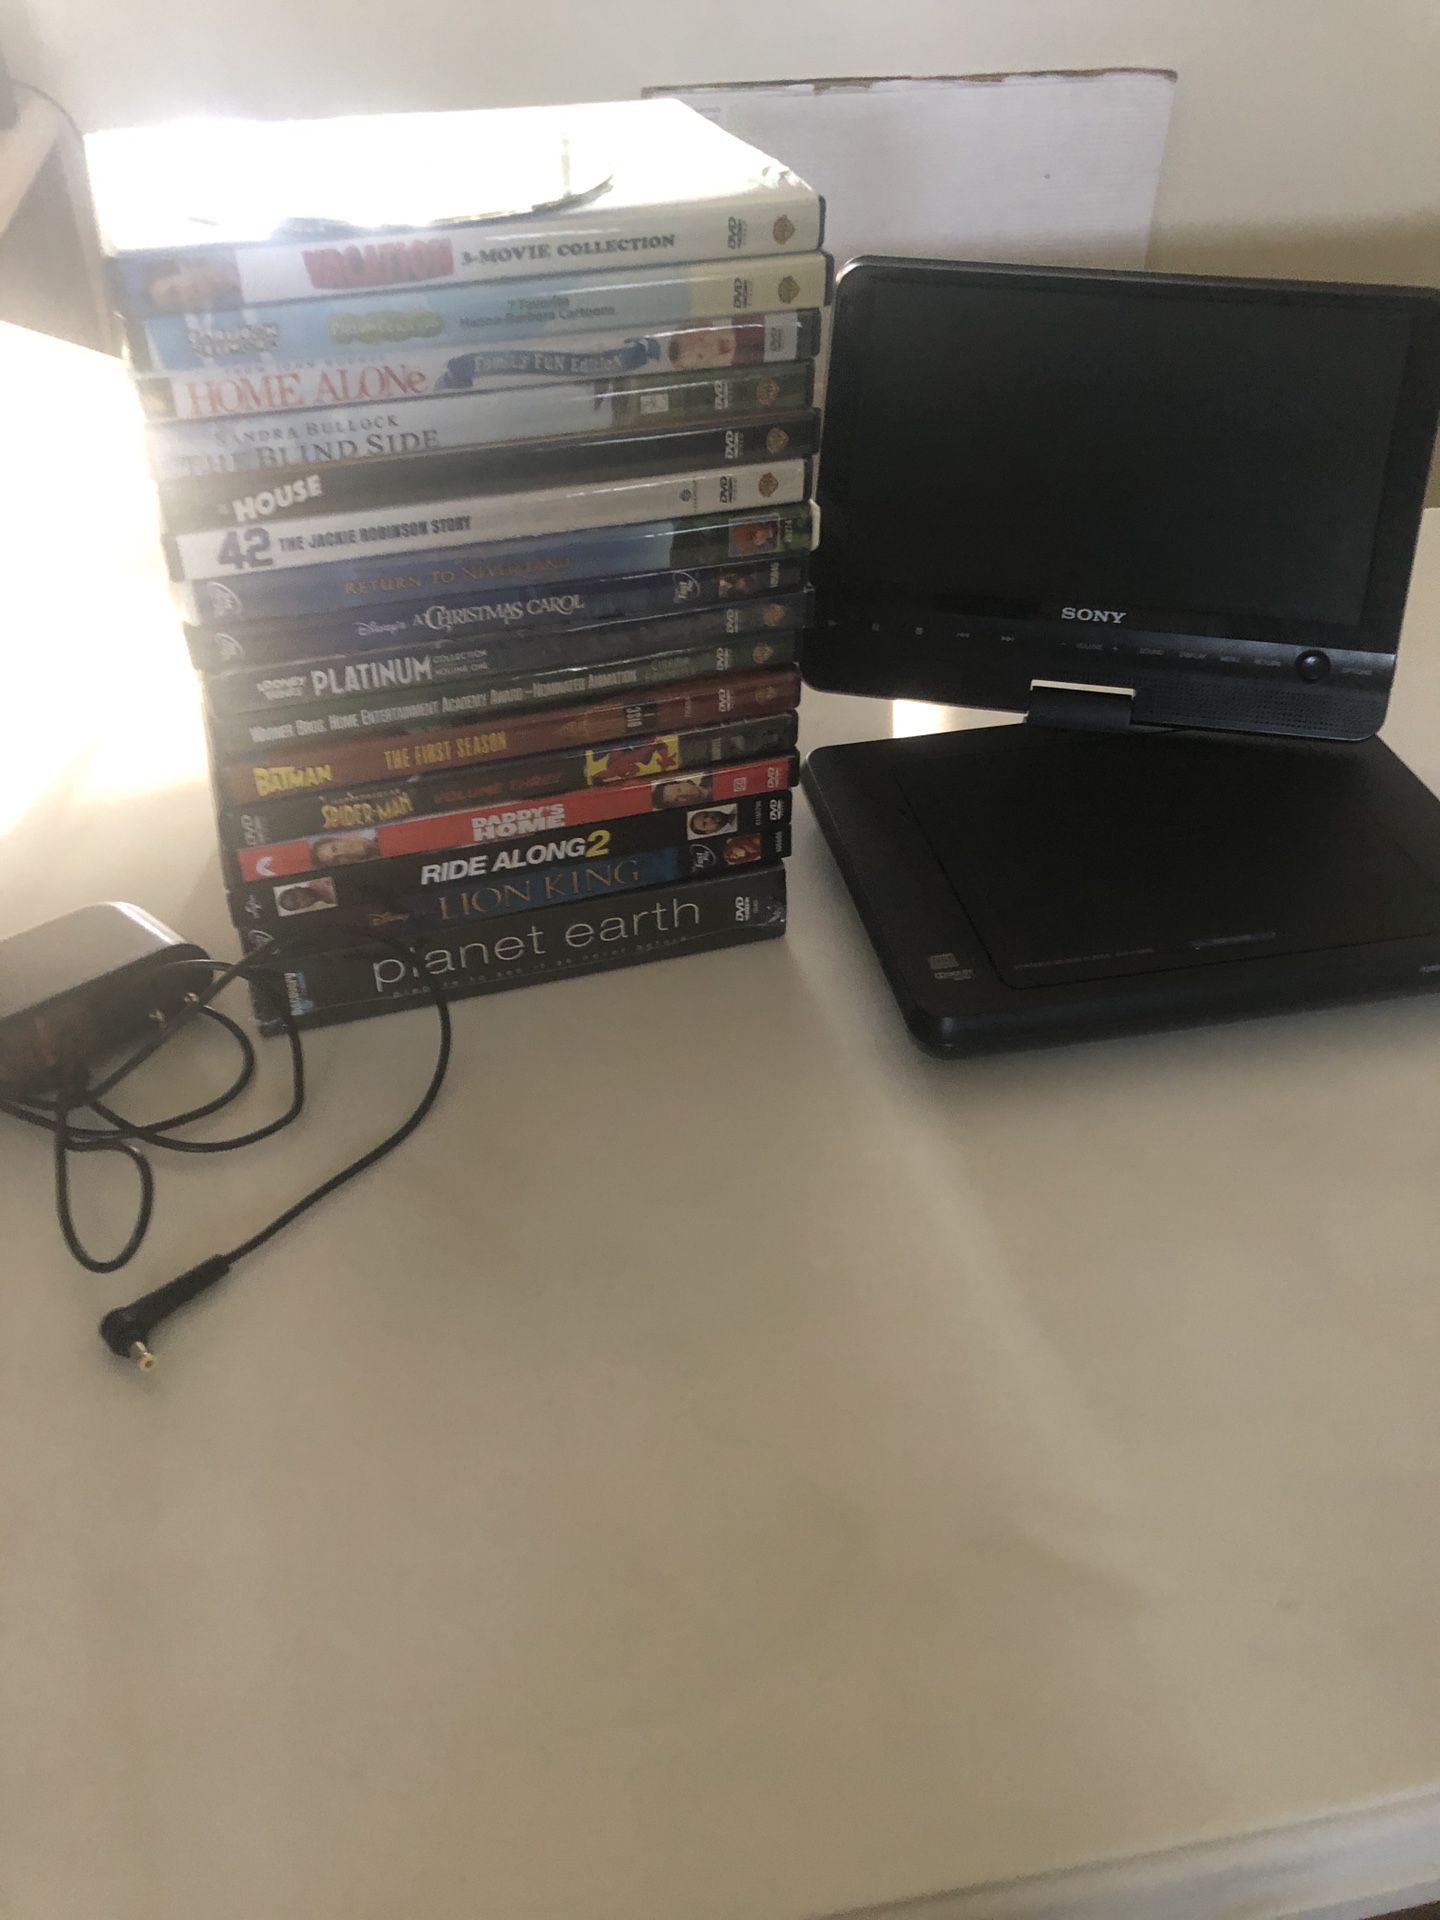 Sony portable DVD player with DVDs